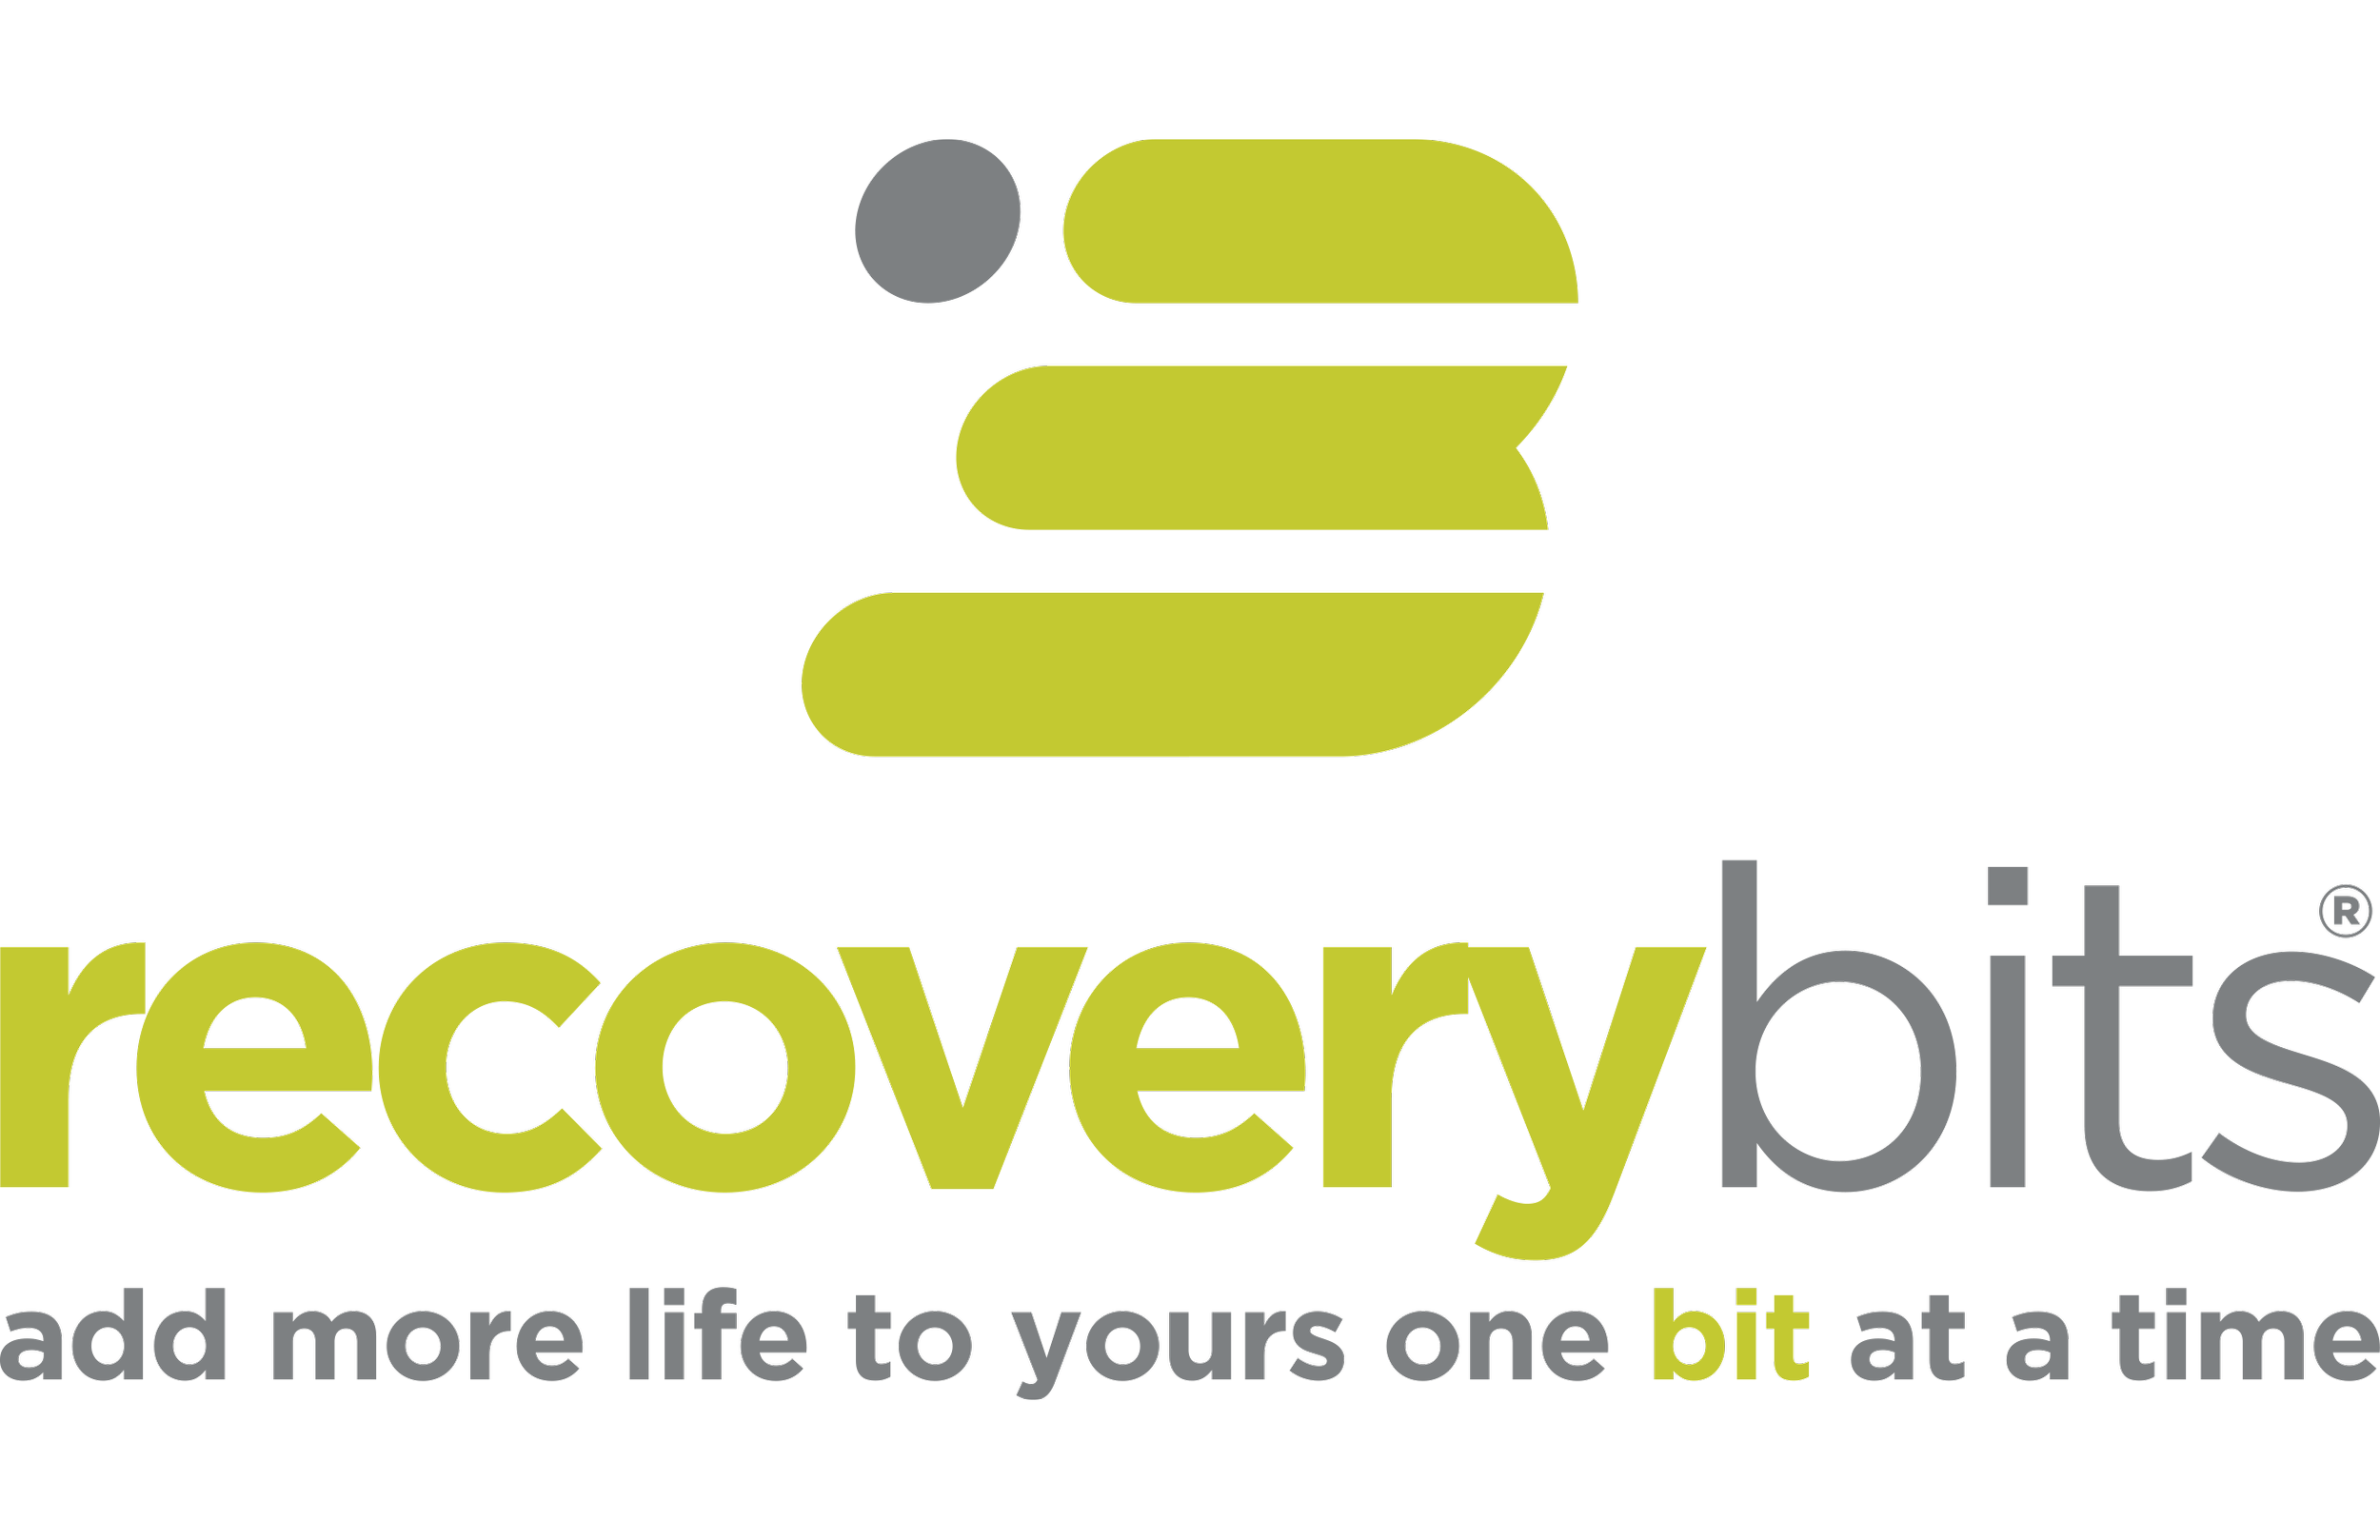 recoverybits-logo.png